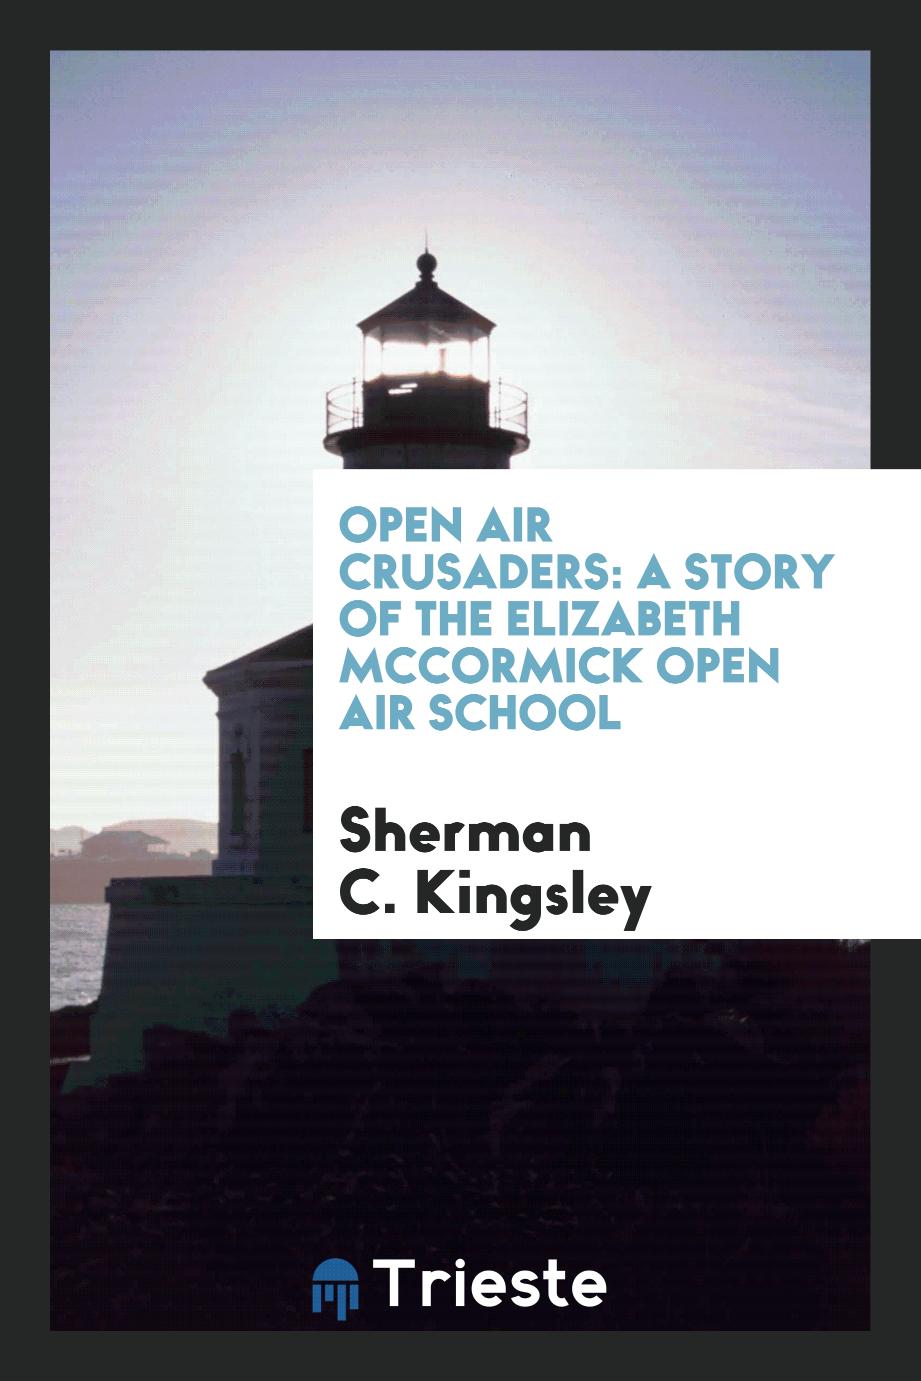 Open Air Crusaders: A Story of the Elizabeth McCormick Open Air School